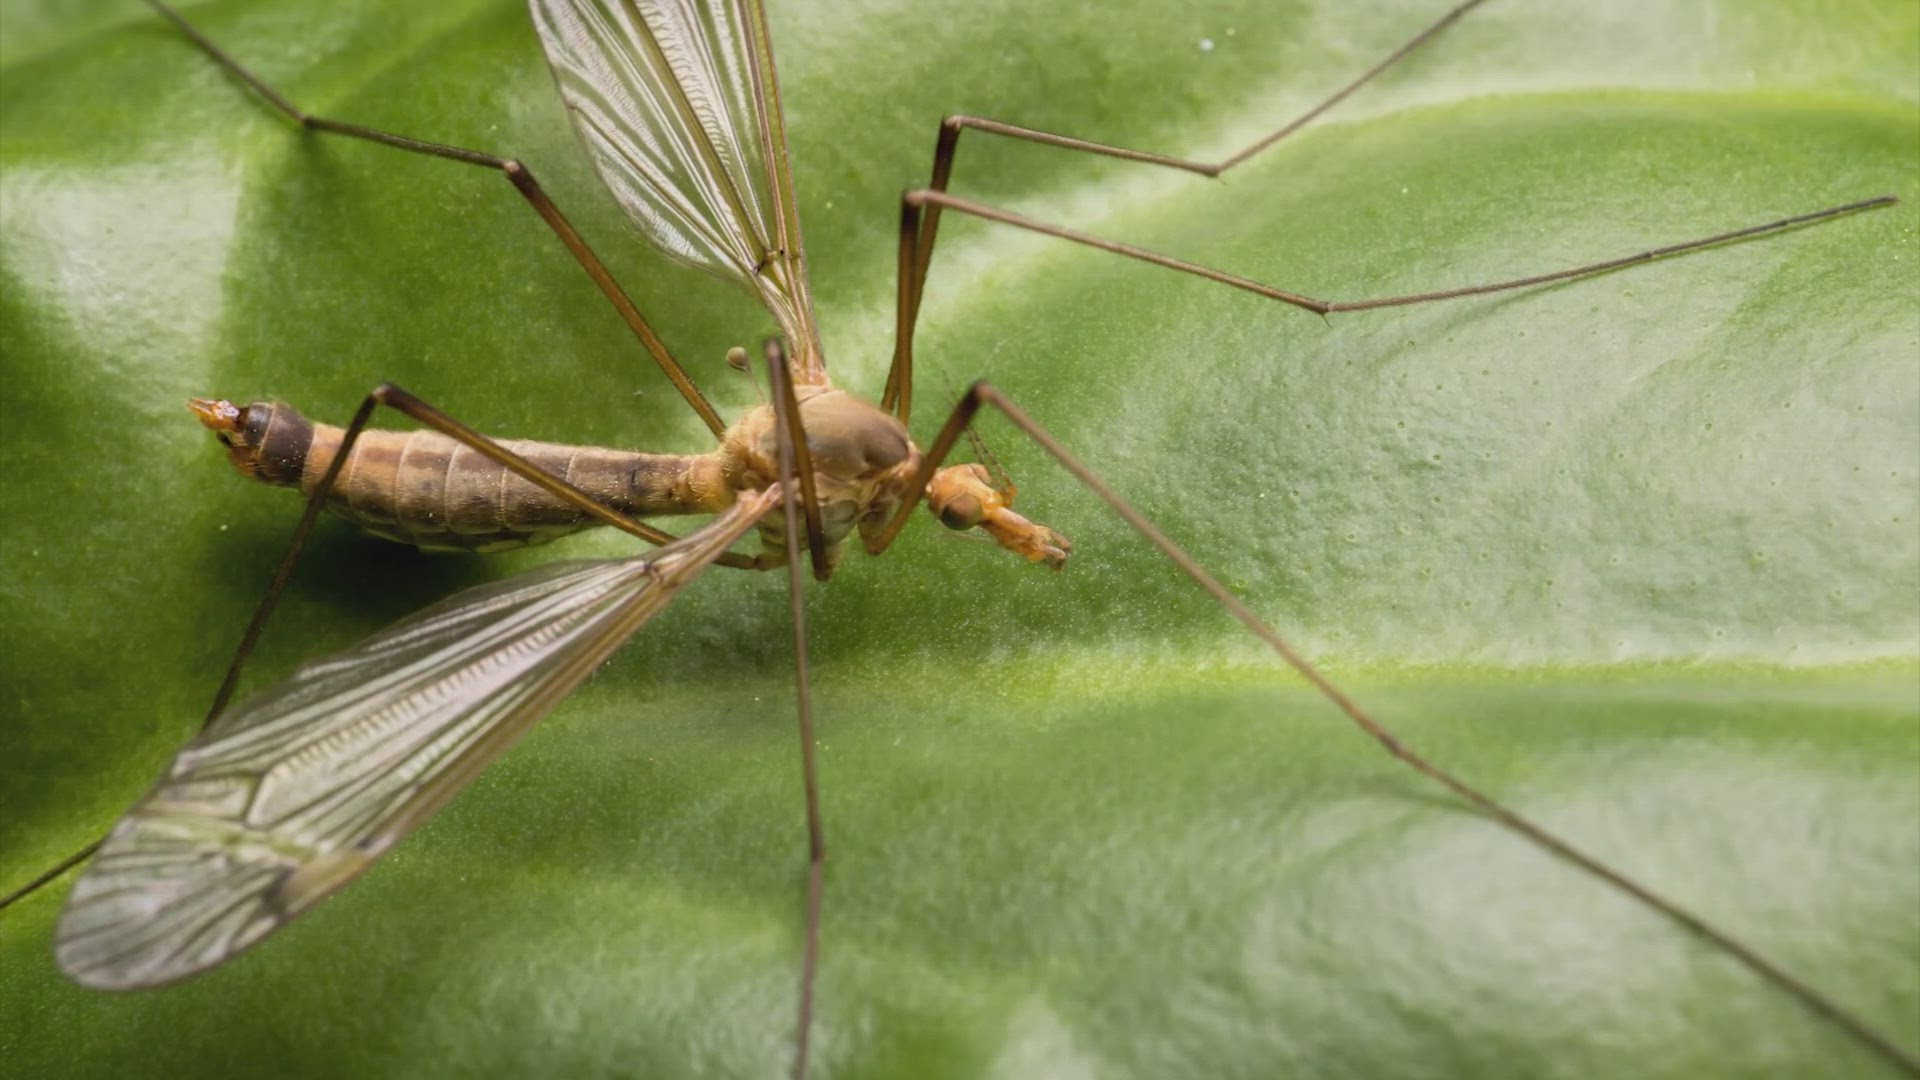 According to Janet Hurley with the Texas A&M Agrilife Extension Service, a booming population of crane flies means that spring is here.